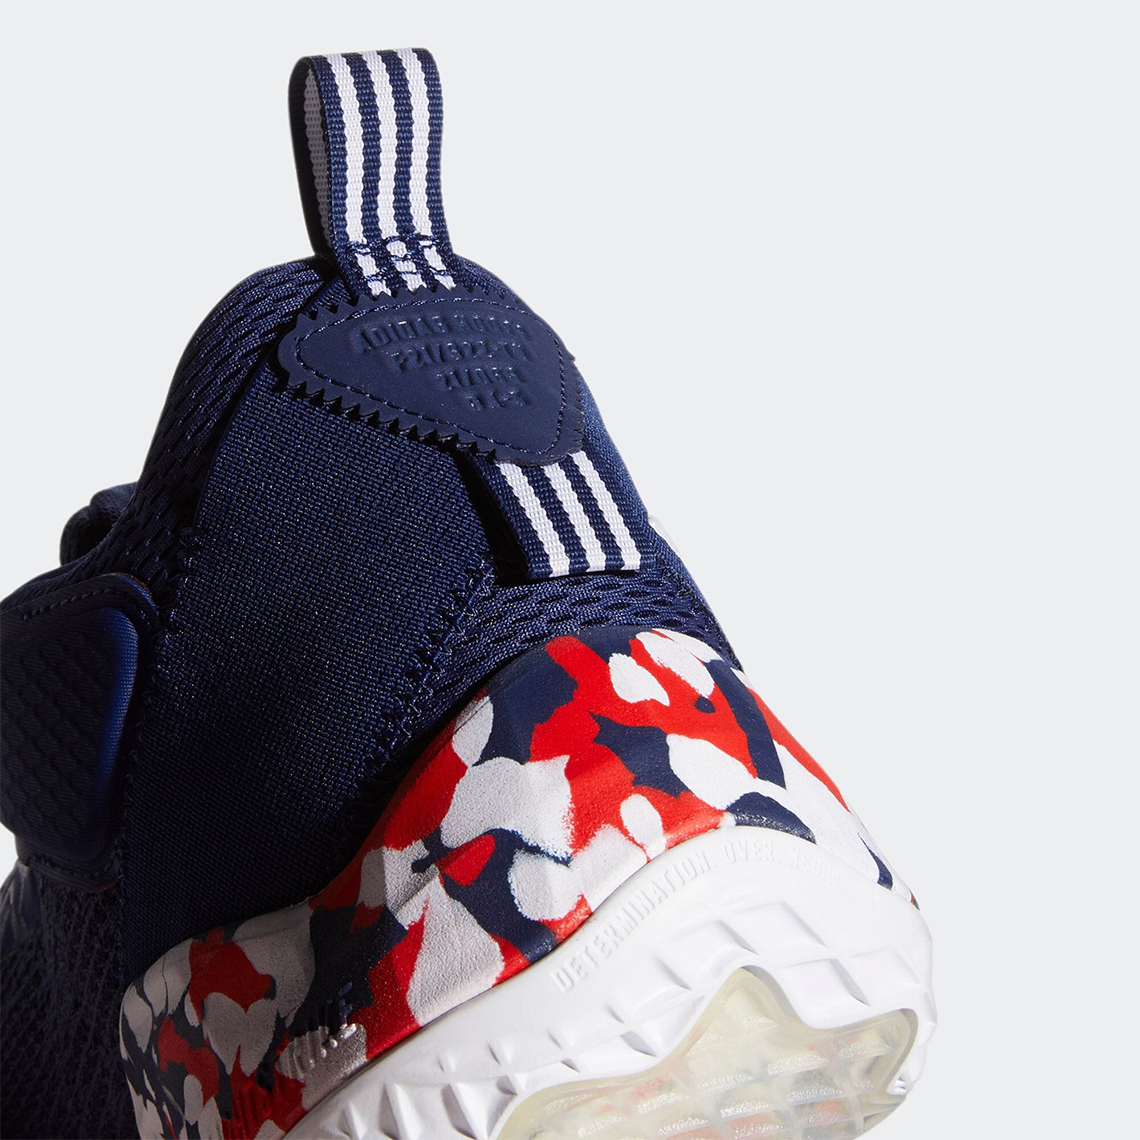 Adidas Don Issue 3 Usa Gw2945 Release Date 4